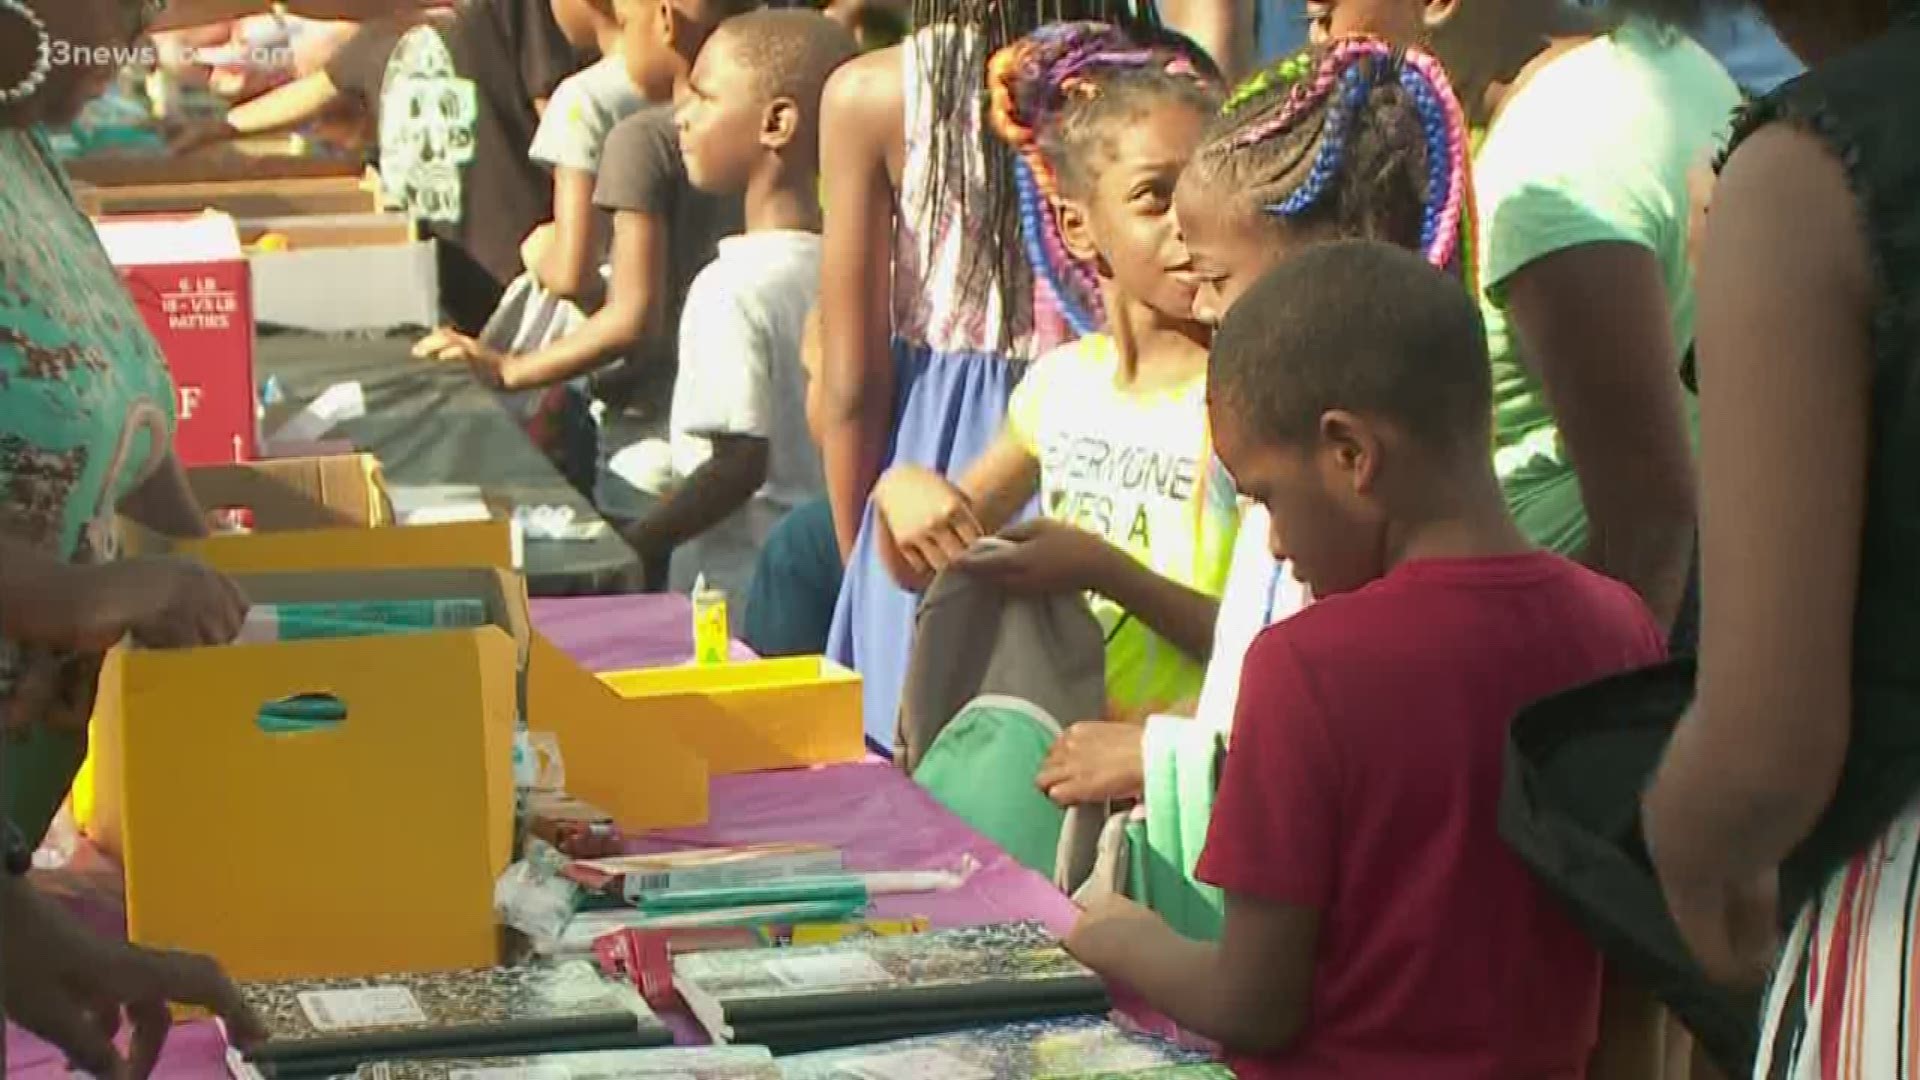 Local nonprofit hosts backpack, school supply giveaway in Chesapeake